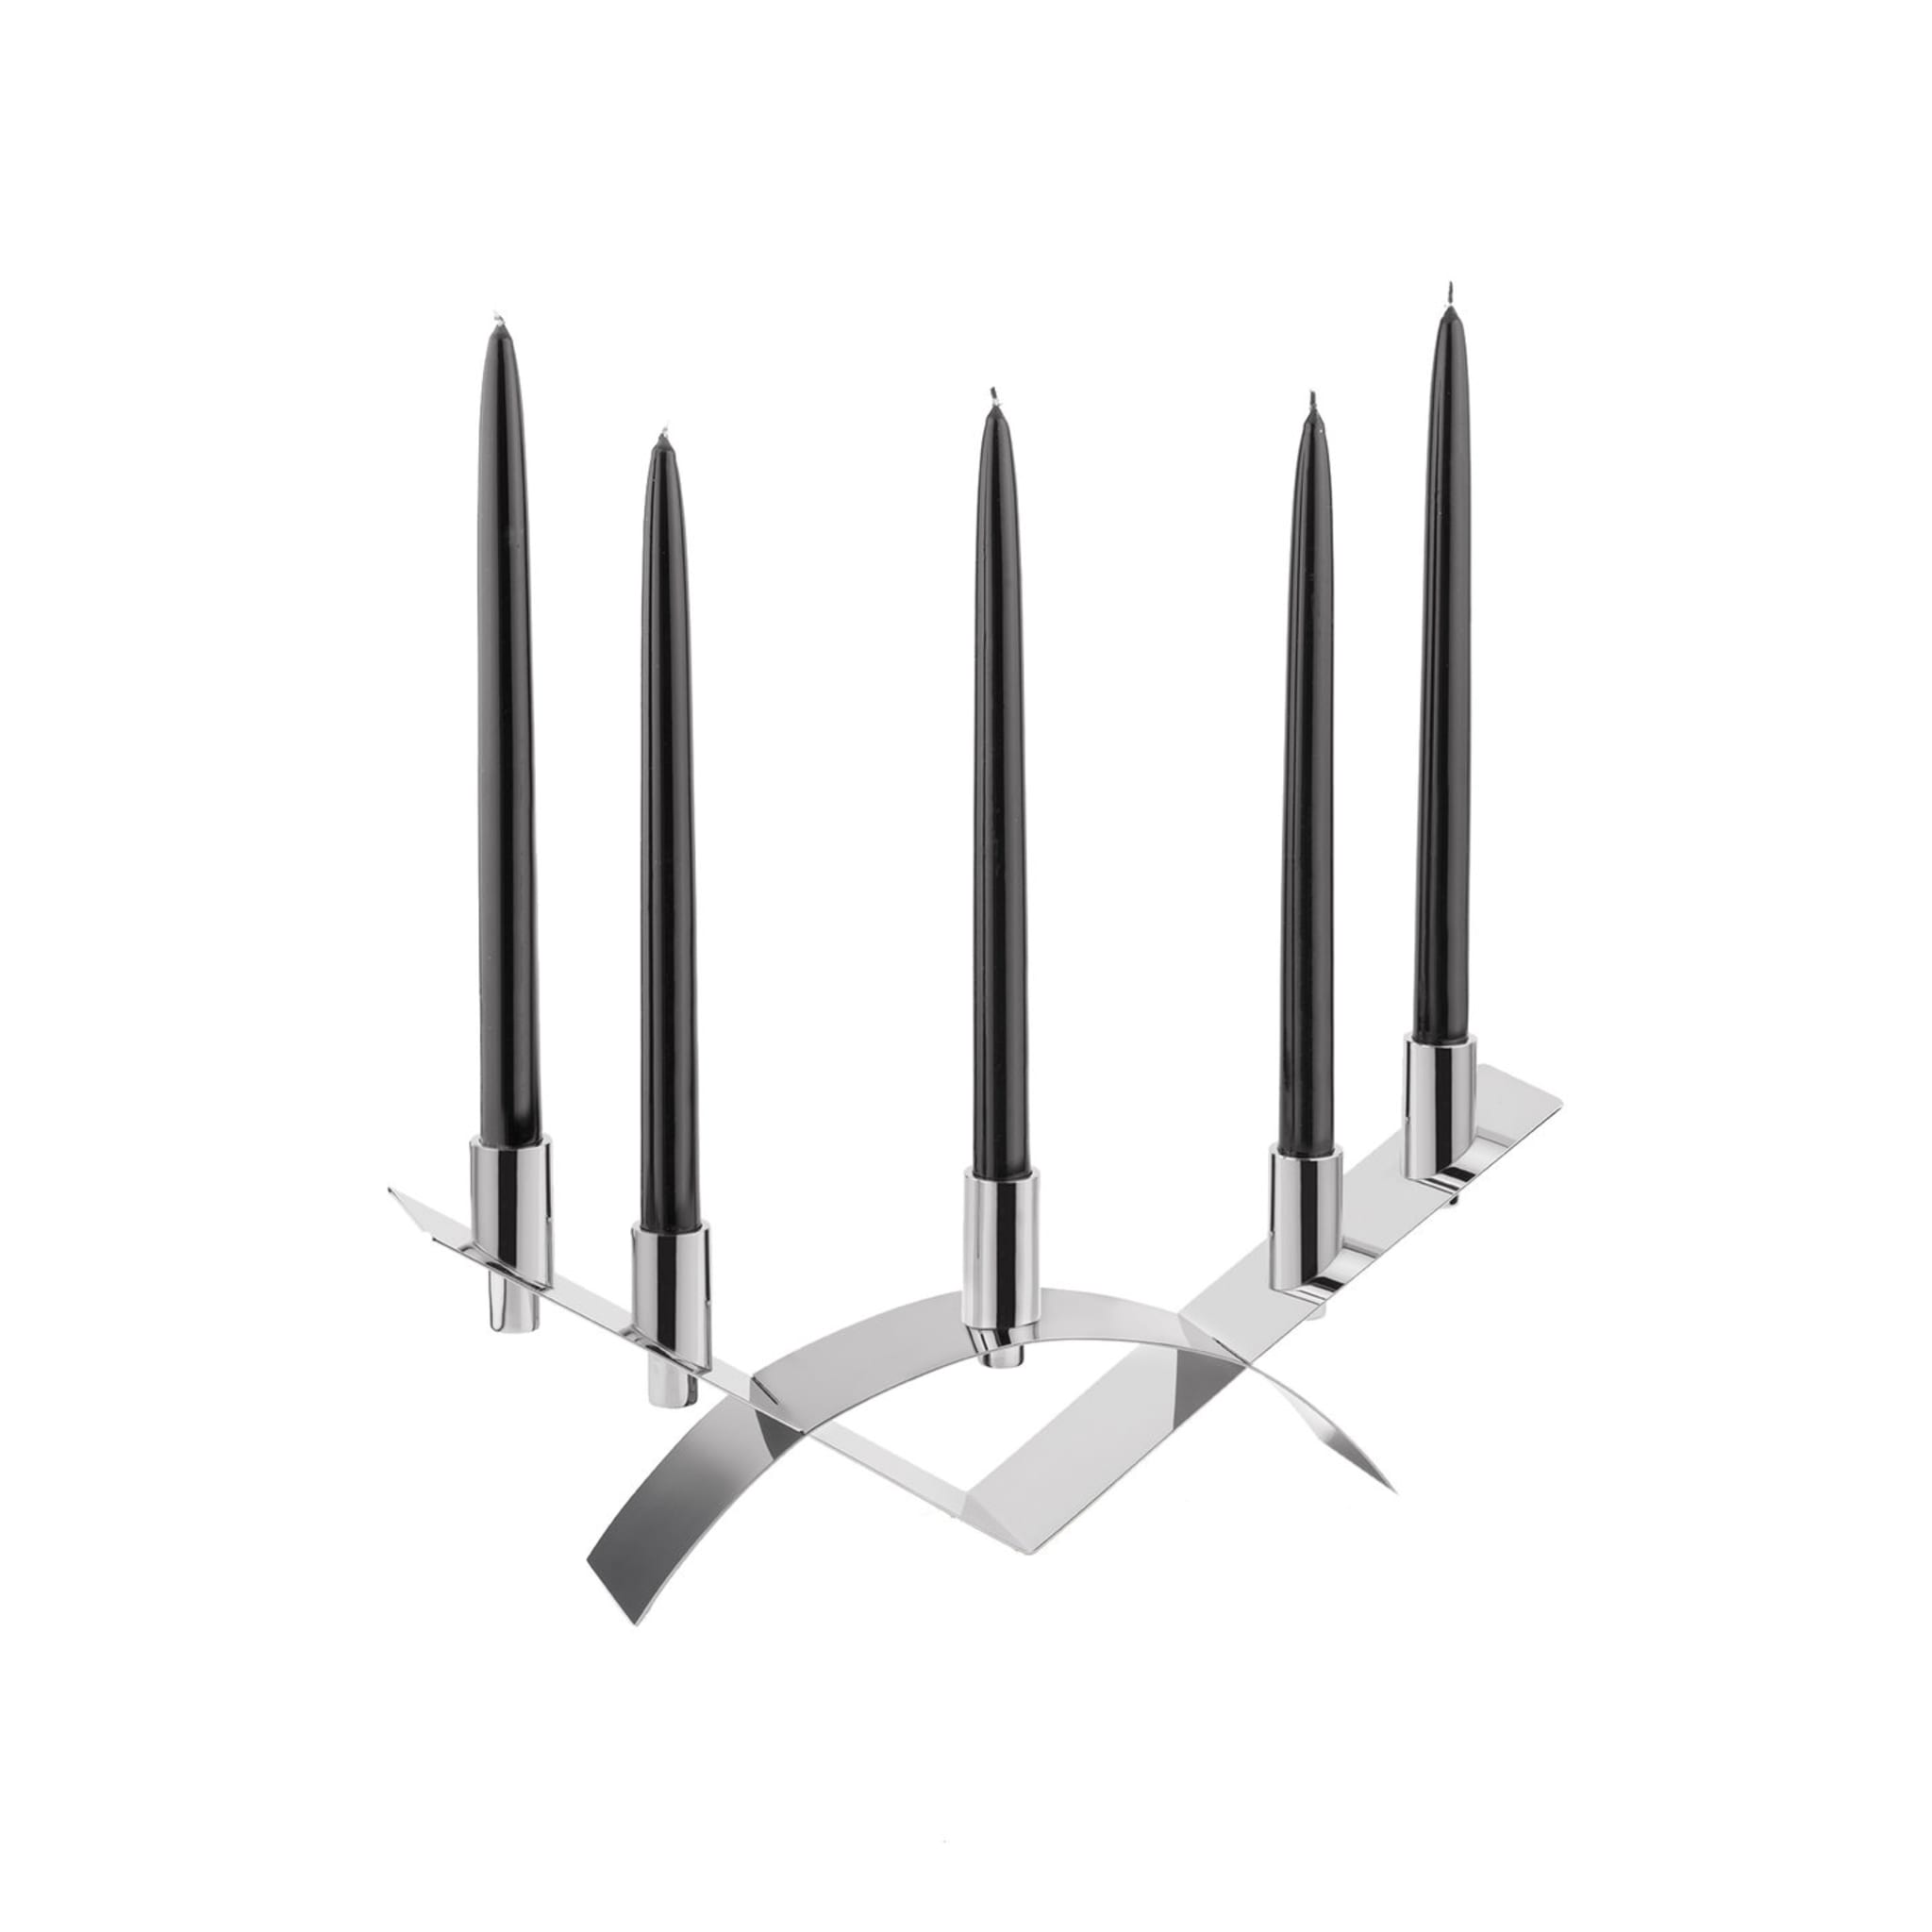 5-Candle Candelabra in Stainless Steel - Main view